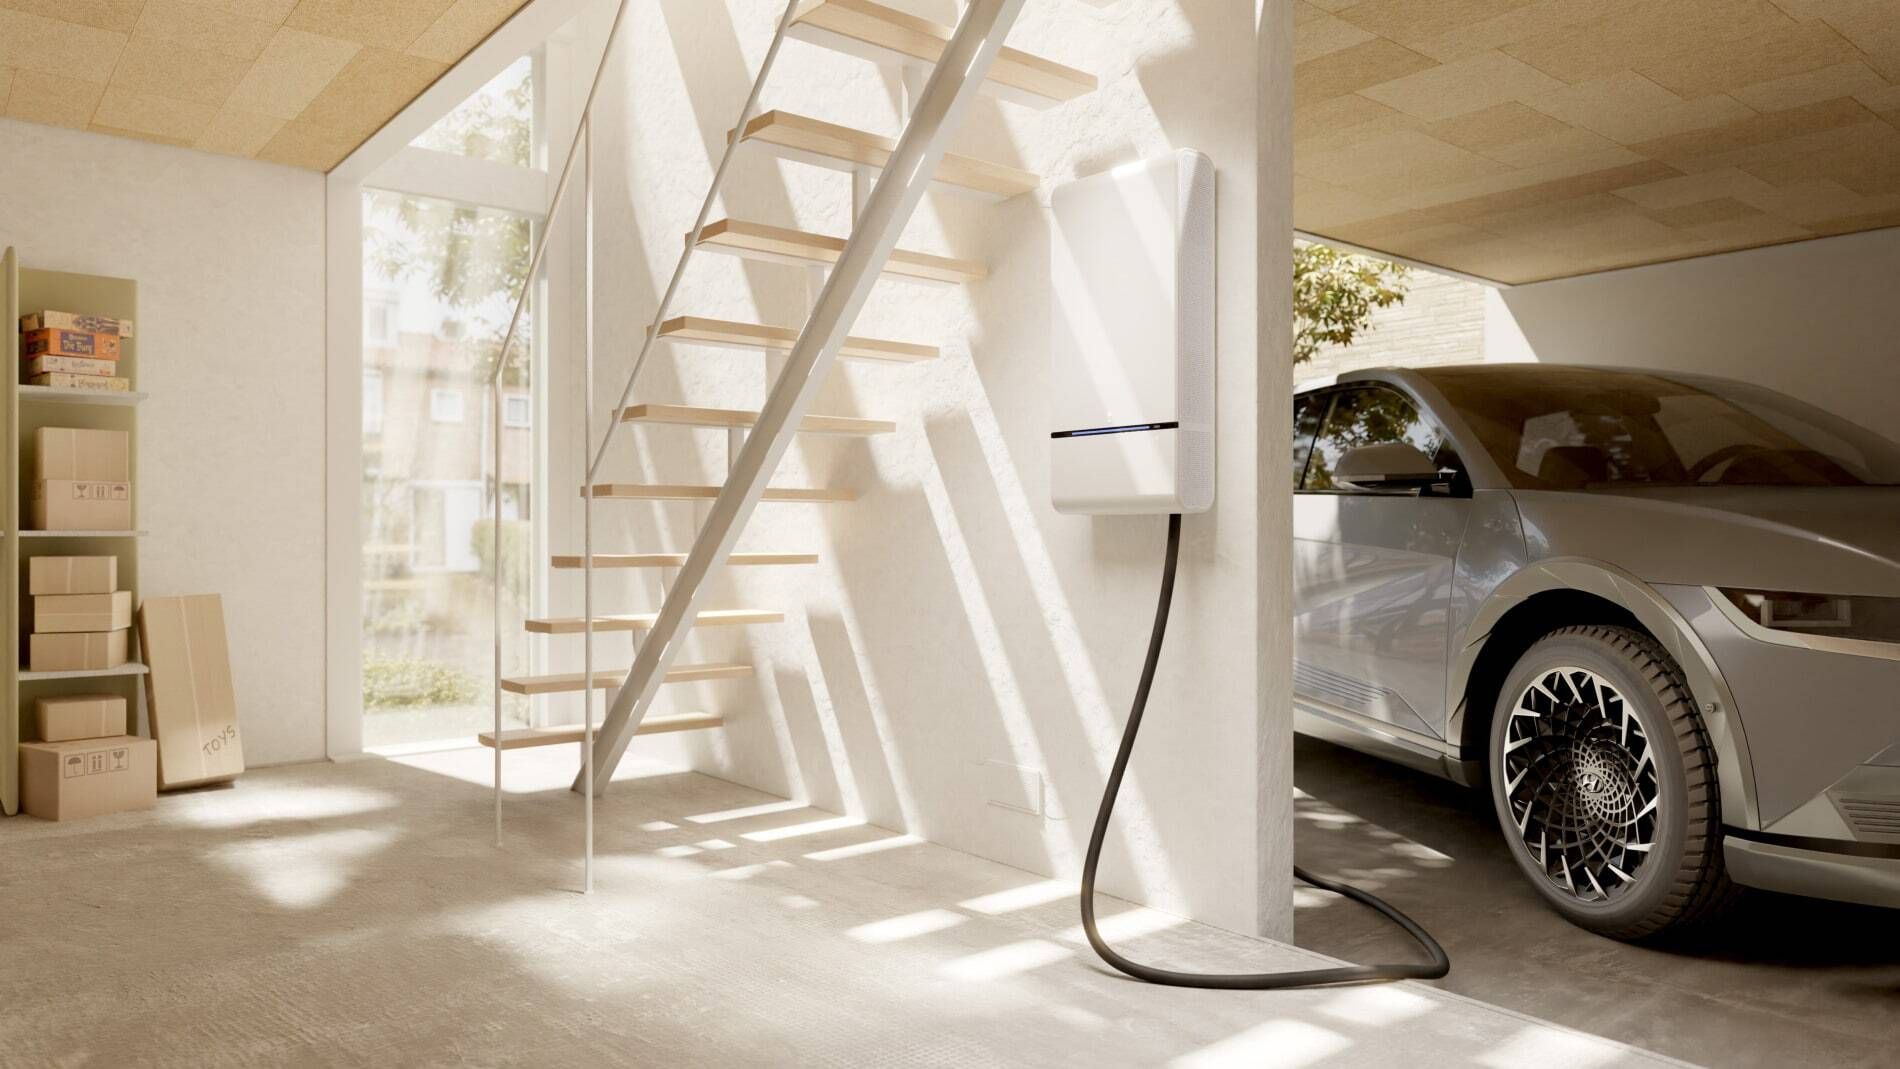 Wallbox and Bidirectional Energy Selected by California Energy Commission for Proposed Awards to Deploy V2X Chargers Across California